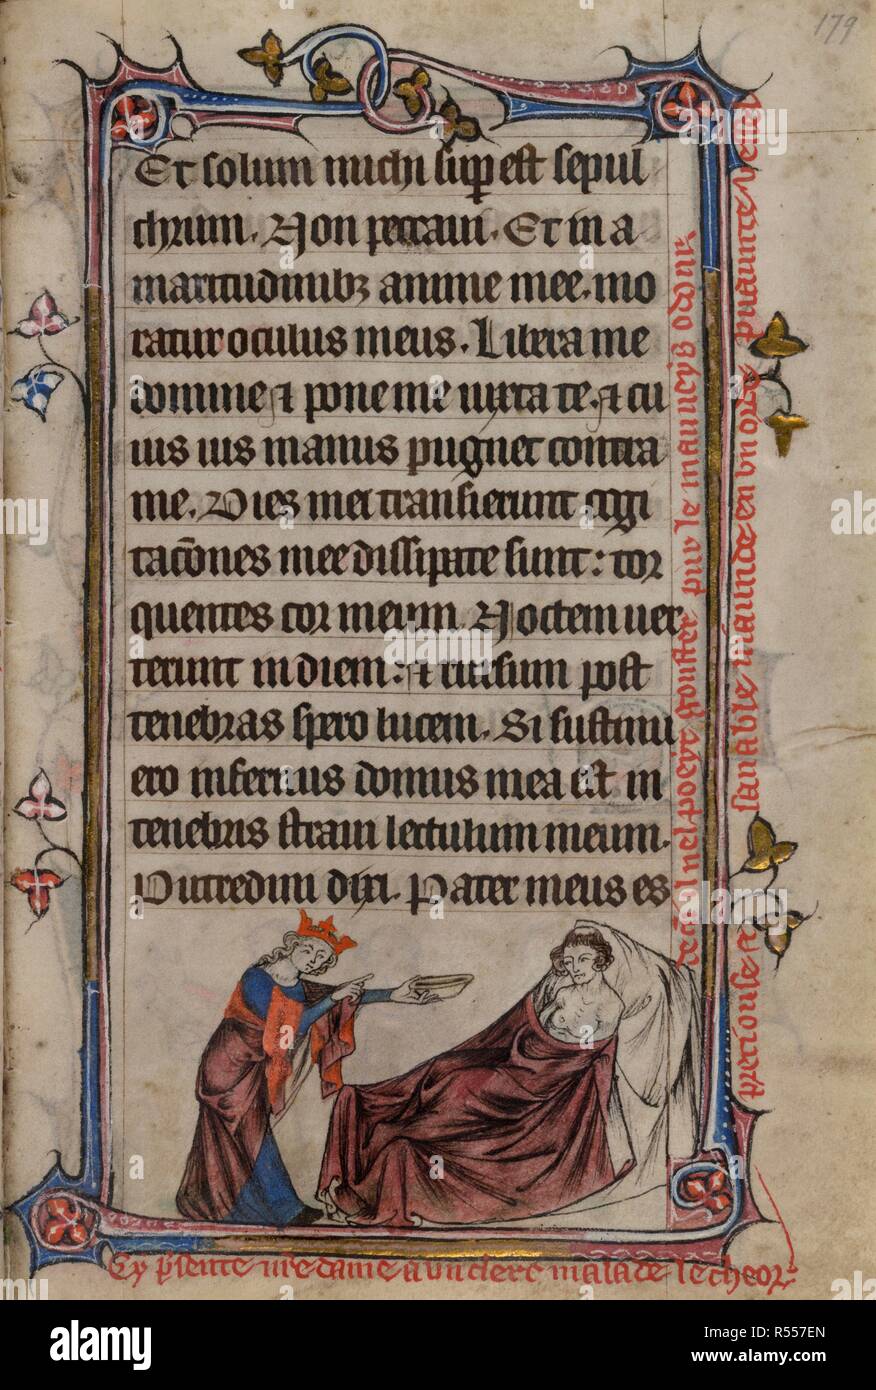 Bas-de-page scene of Dainties on a Foul Dish, of the Virgin Mary reprimanding and offering a dish to a bedridden cleric, with a caption reading, â€˜Cy p[re]sente n[ost]re dame a un clerc malade lecheor preciouse et sanable viaunde en un orde puaunte vessel de a[u]I il nel poeyt gouster pur le mauveys odourâ€™. Book of Hours, Use of Sarum ('The Taymouth Hours'). England, S. E.? (London?); 2nd quarter of the 14th century. Source: Yates Thompson 13, f.179. Language: Latin and French. Stock Photo